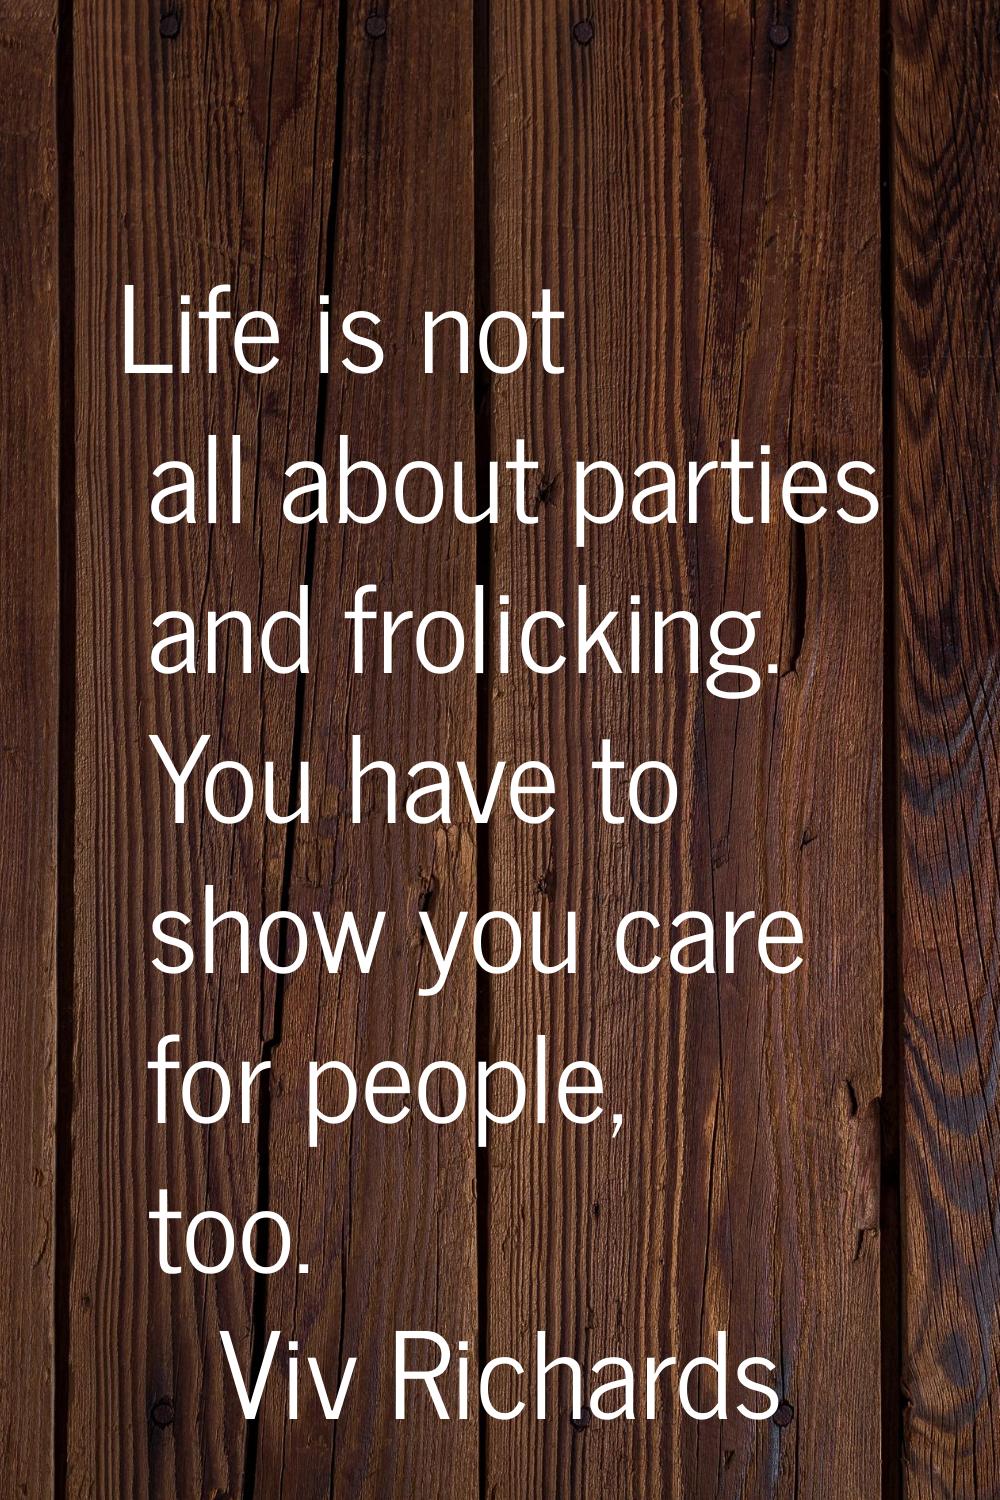 Life is not all about parties and frolicking. You have to show you care for people, too.